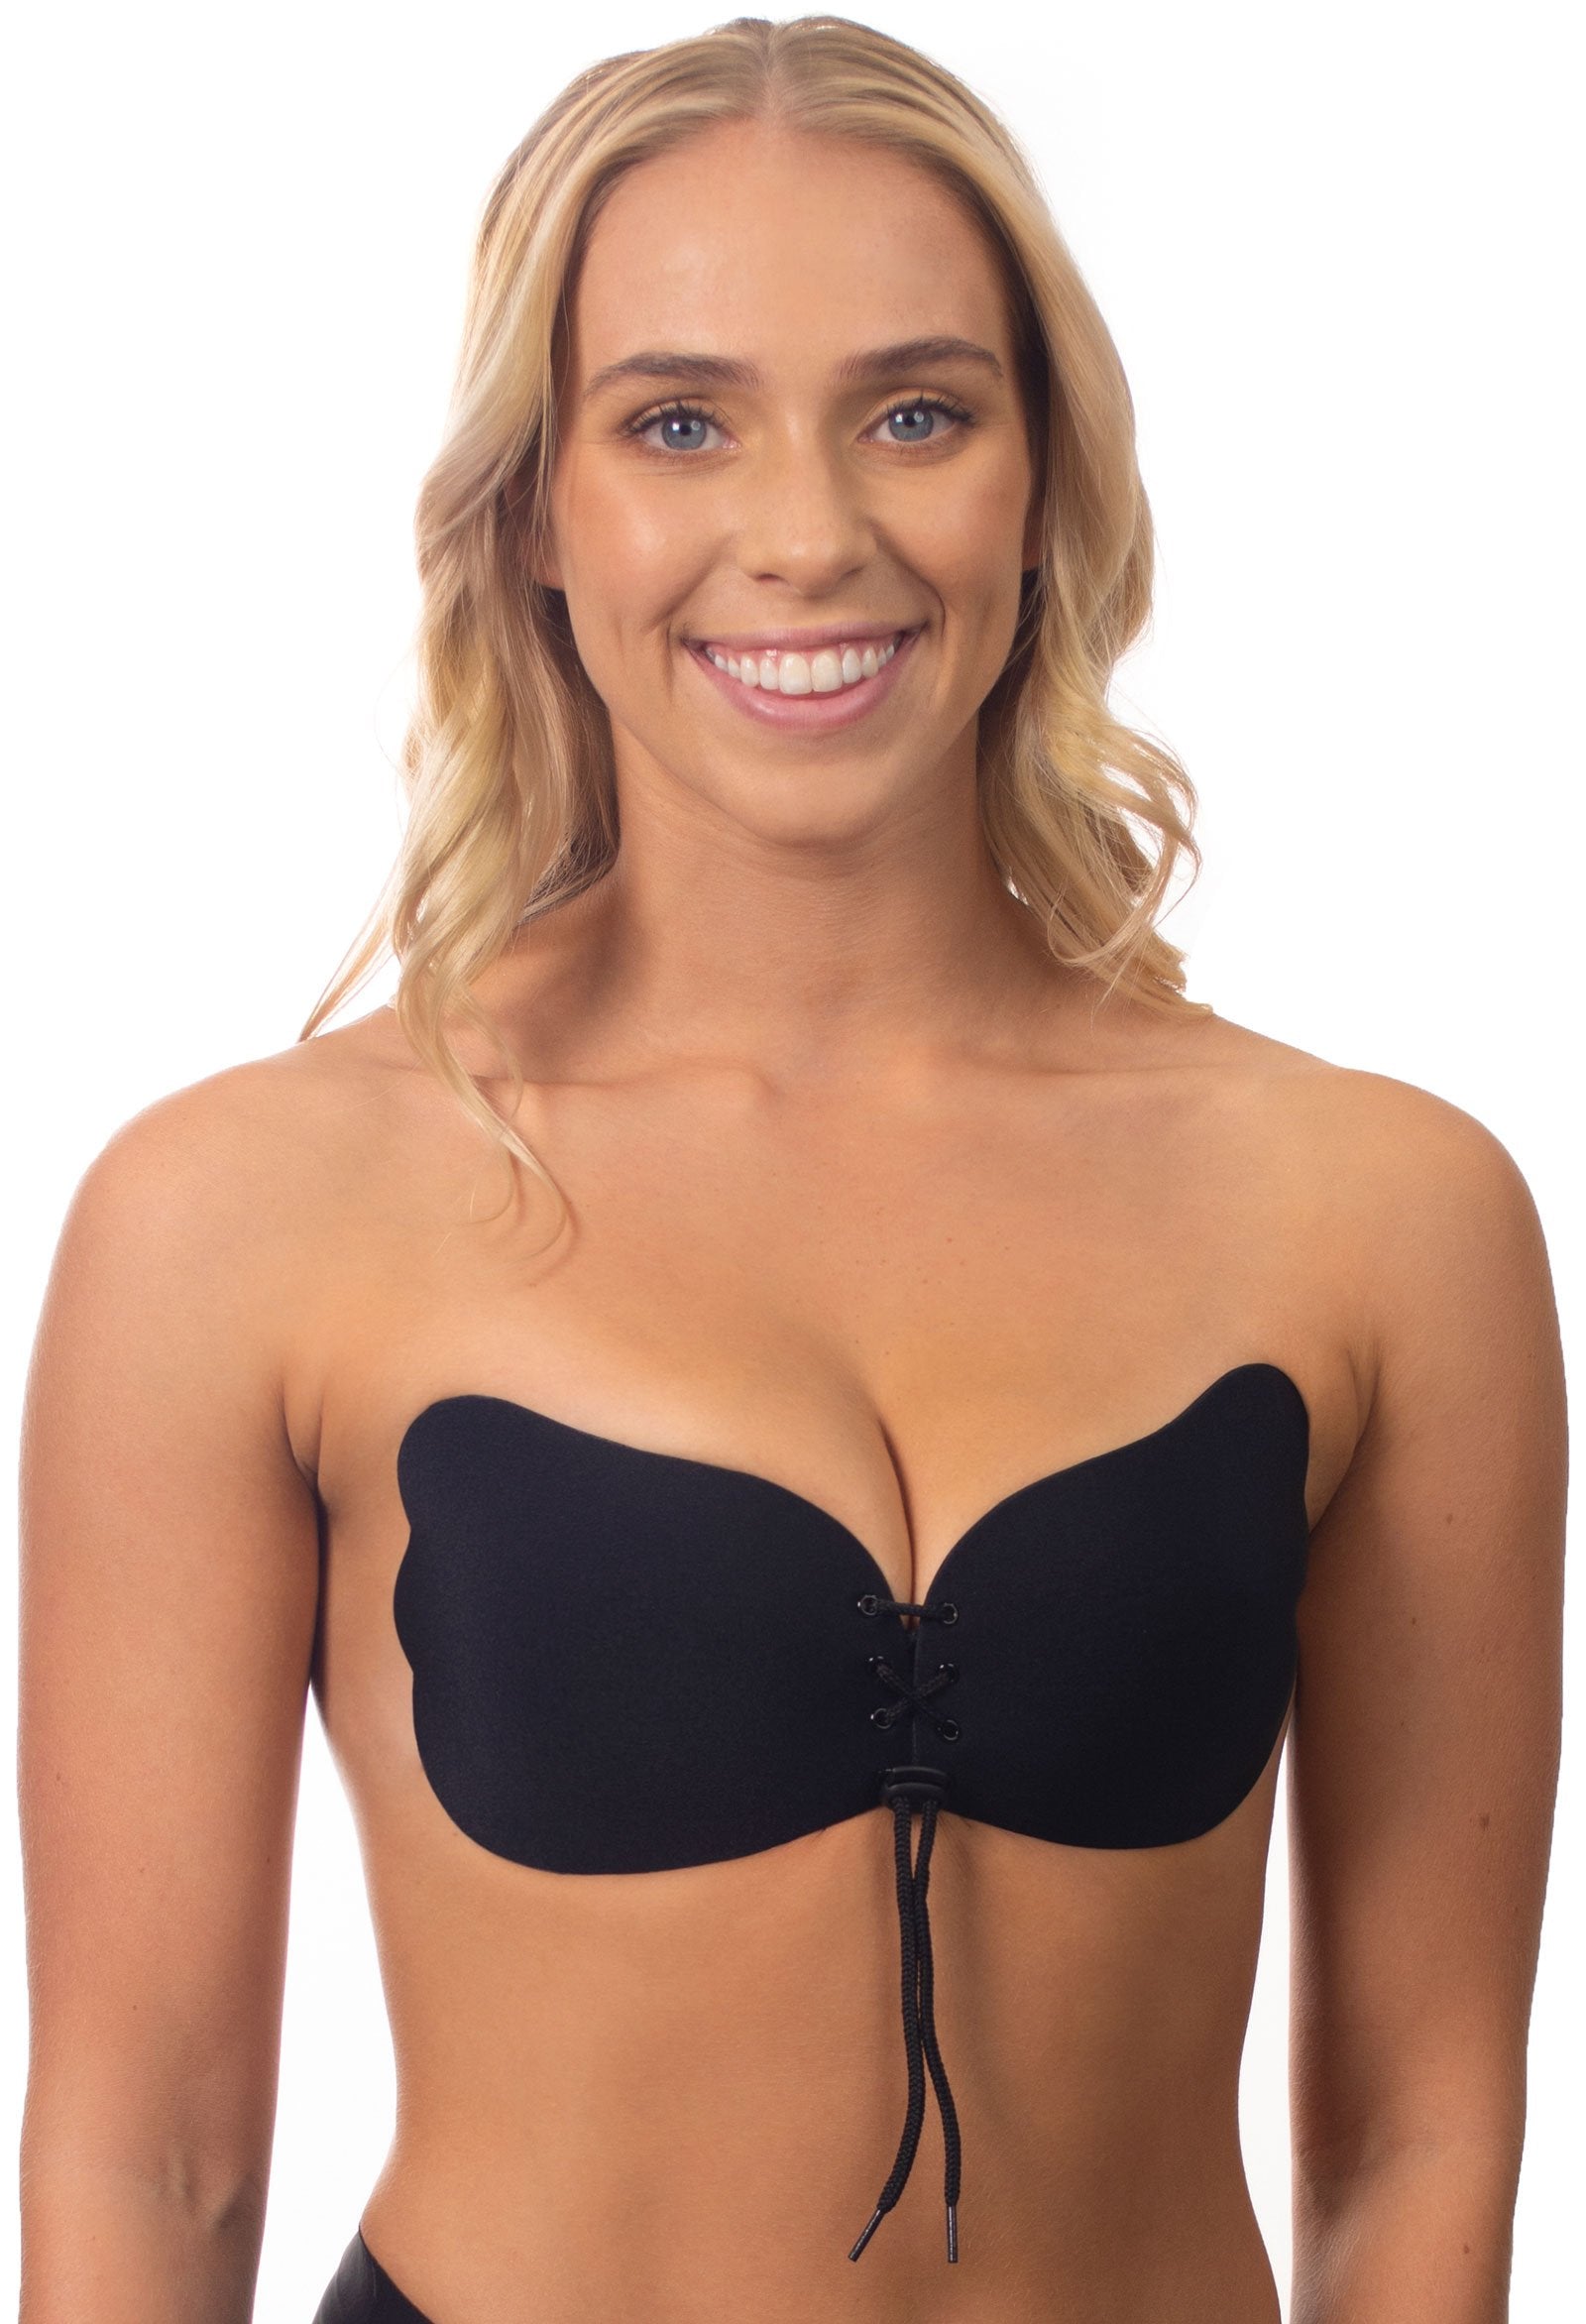 Monday Ultimo Push Up Bikini rts Stick On Bra D Cup Bras for